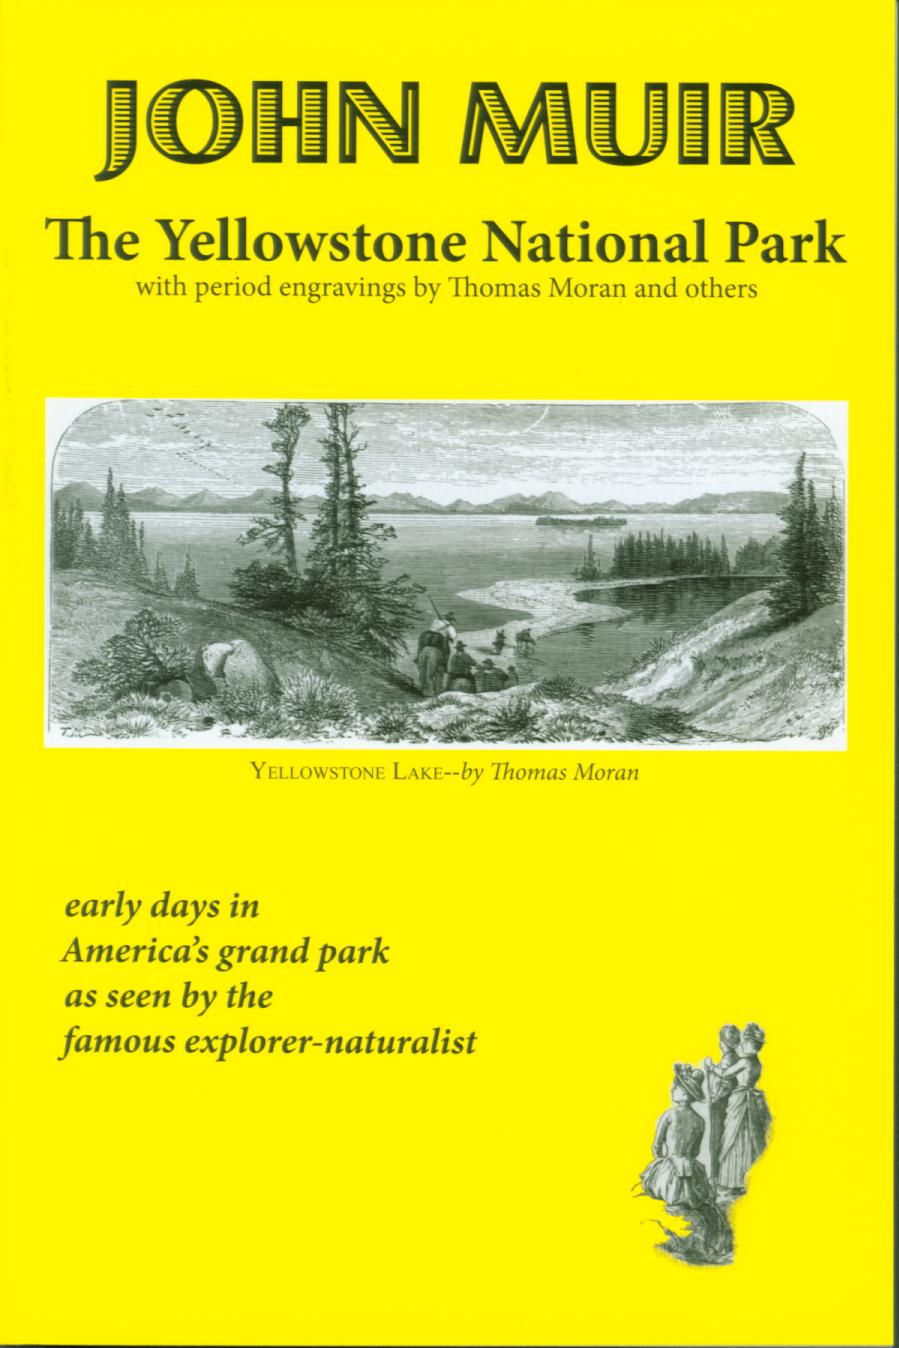 THE YELLOWSTONE NATIONAL PARK.